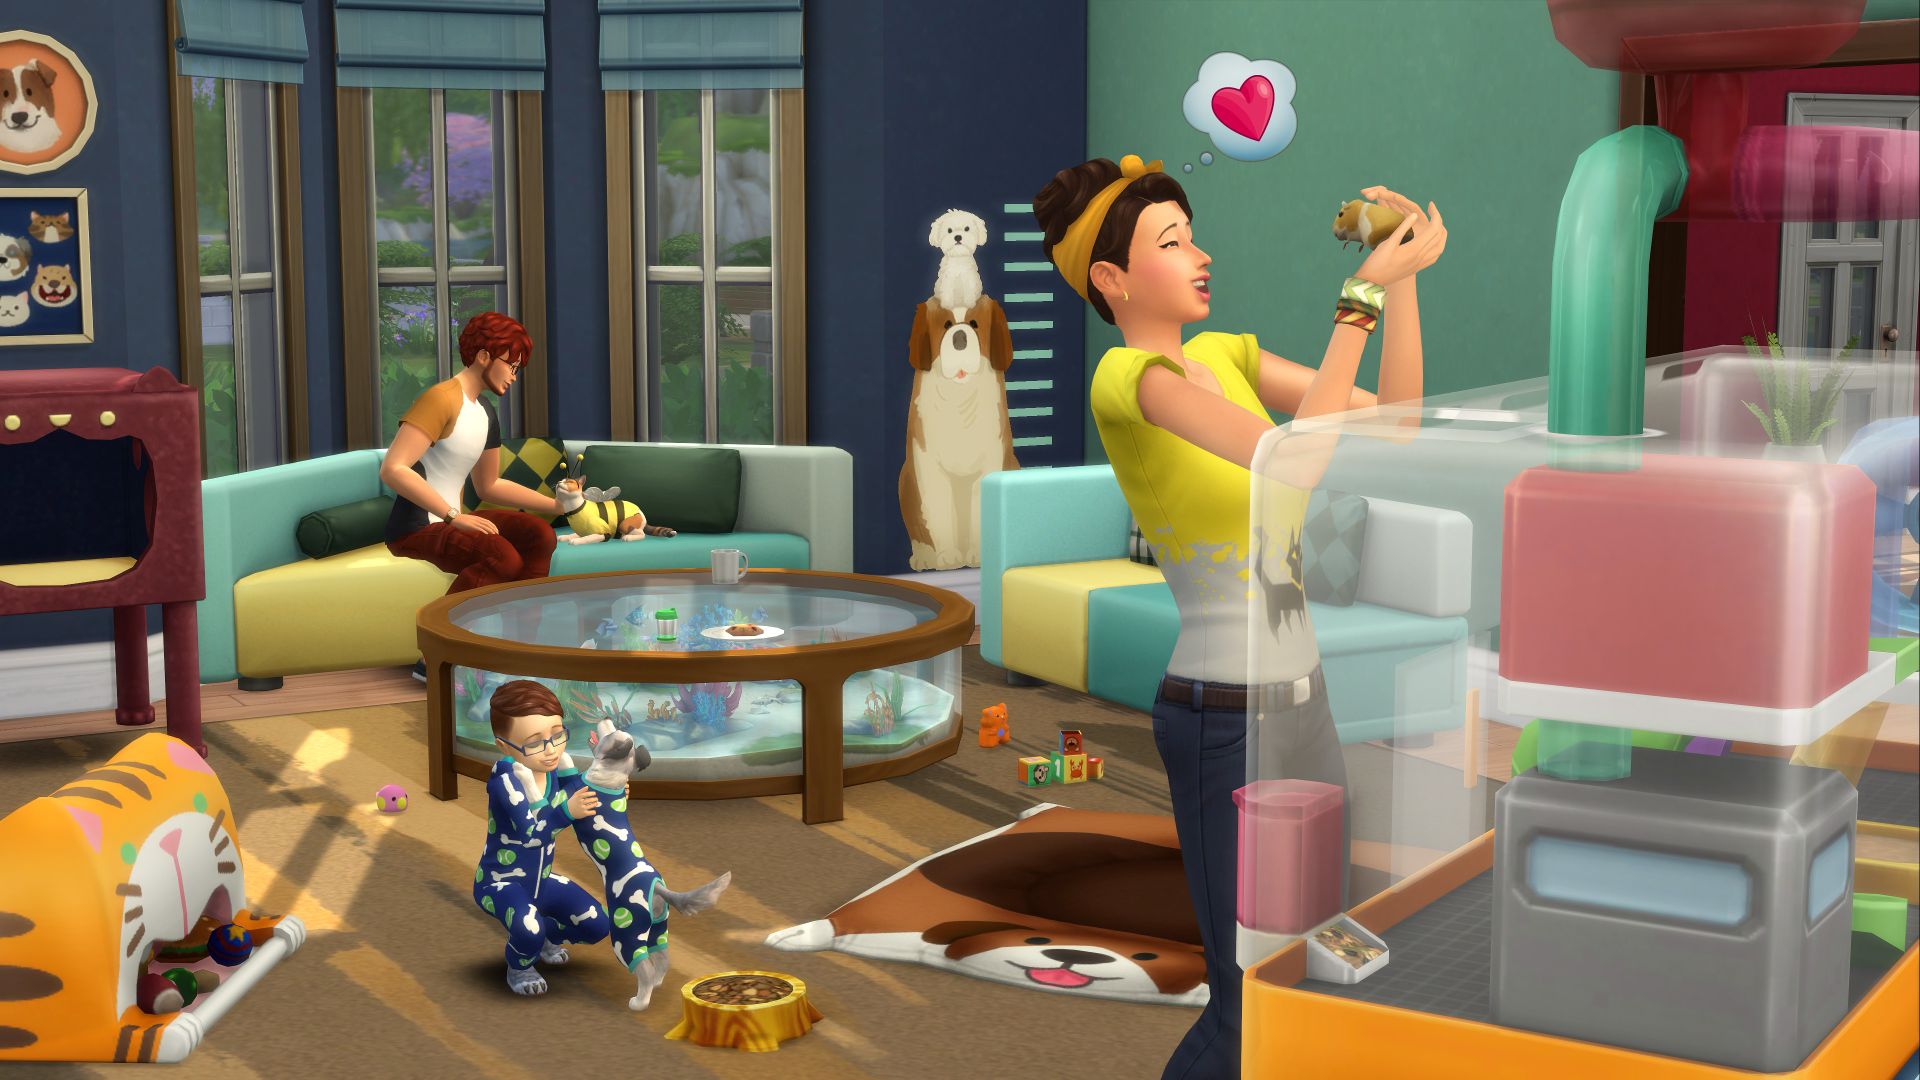 The Sims 4 My First Pet Stuff Free Download